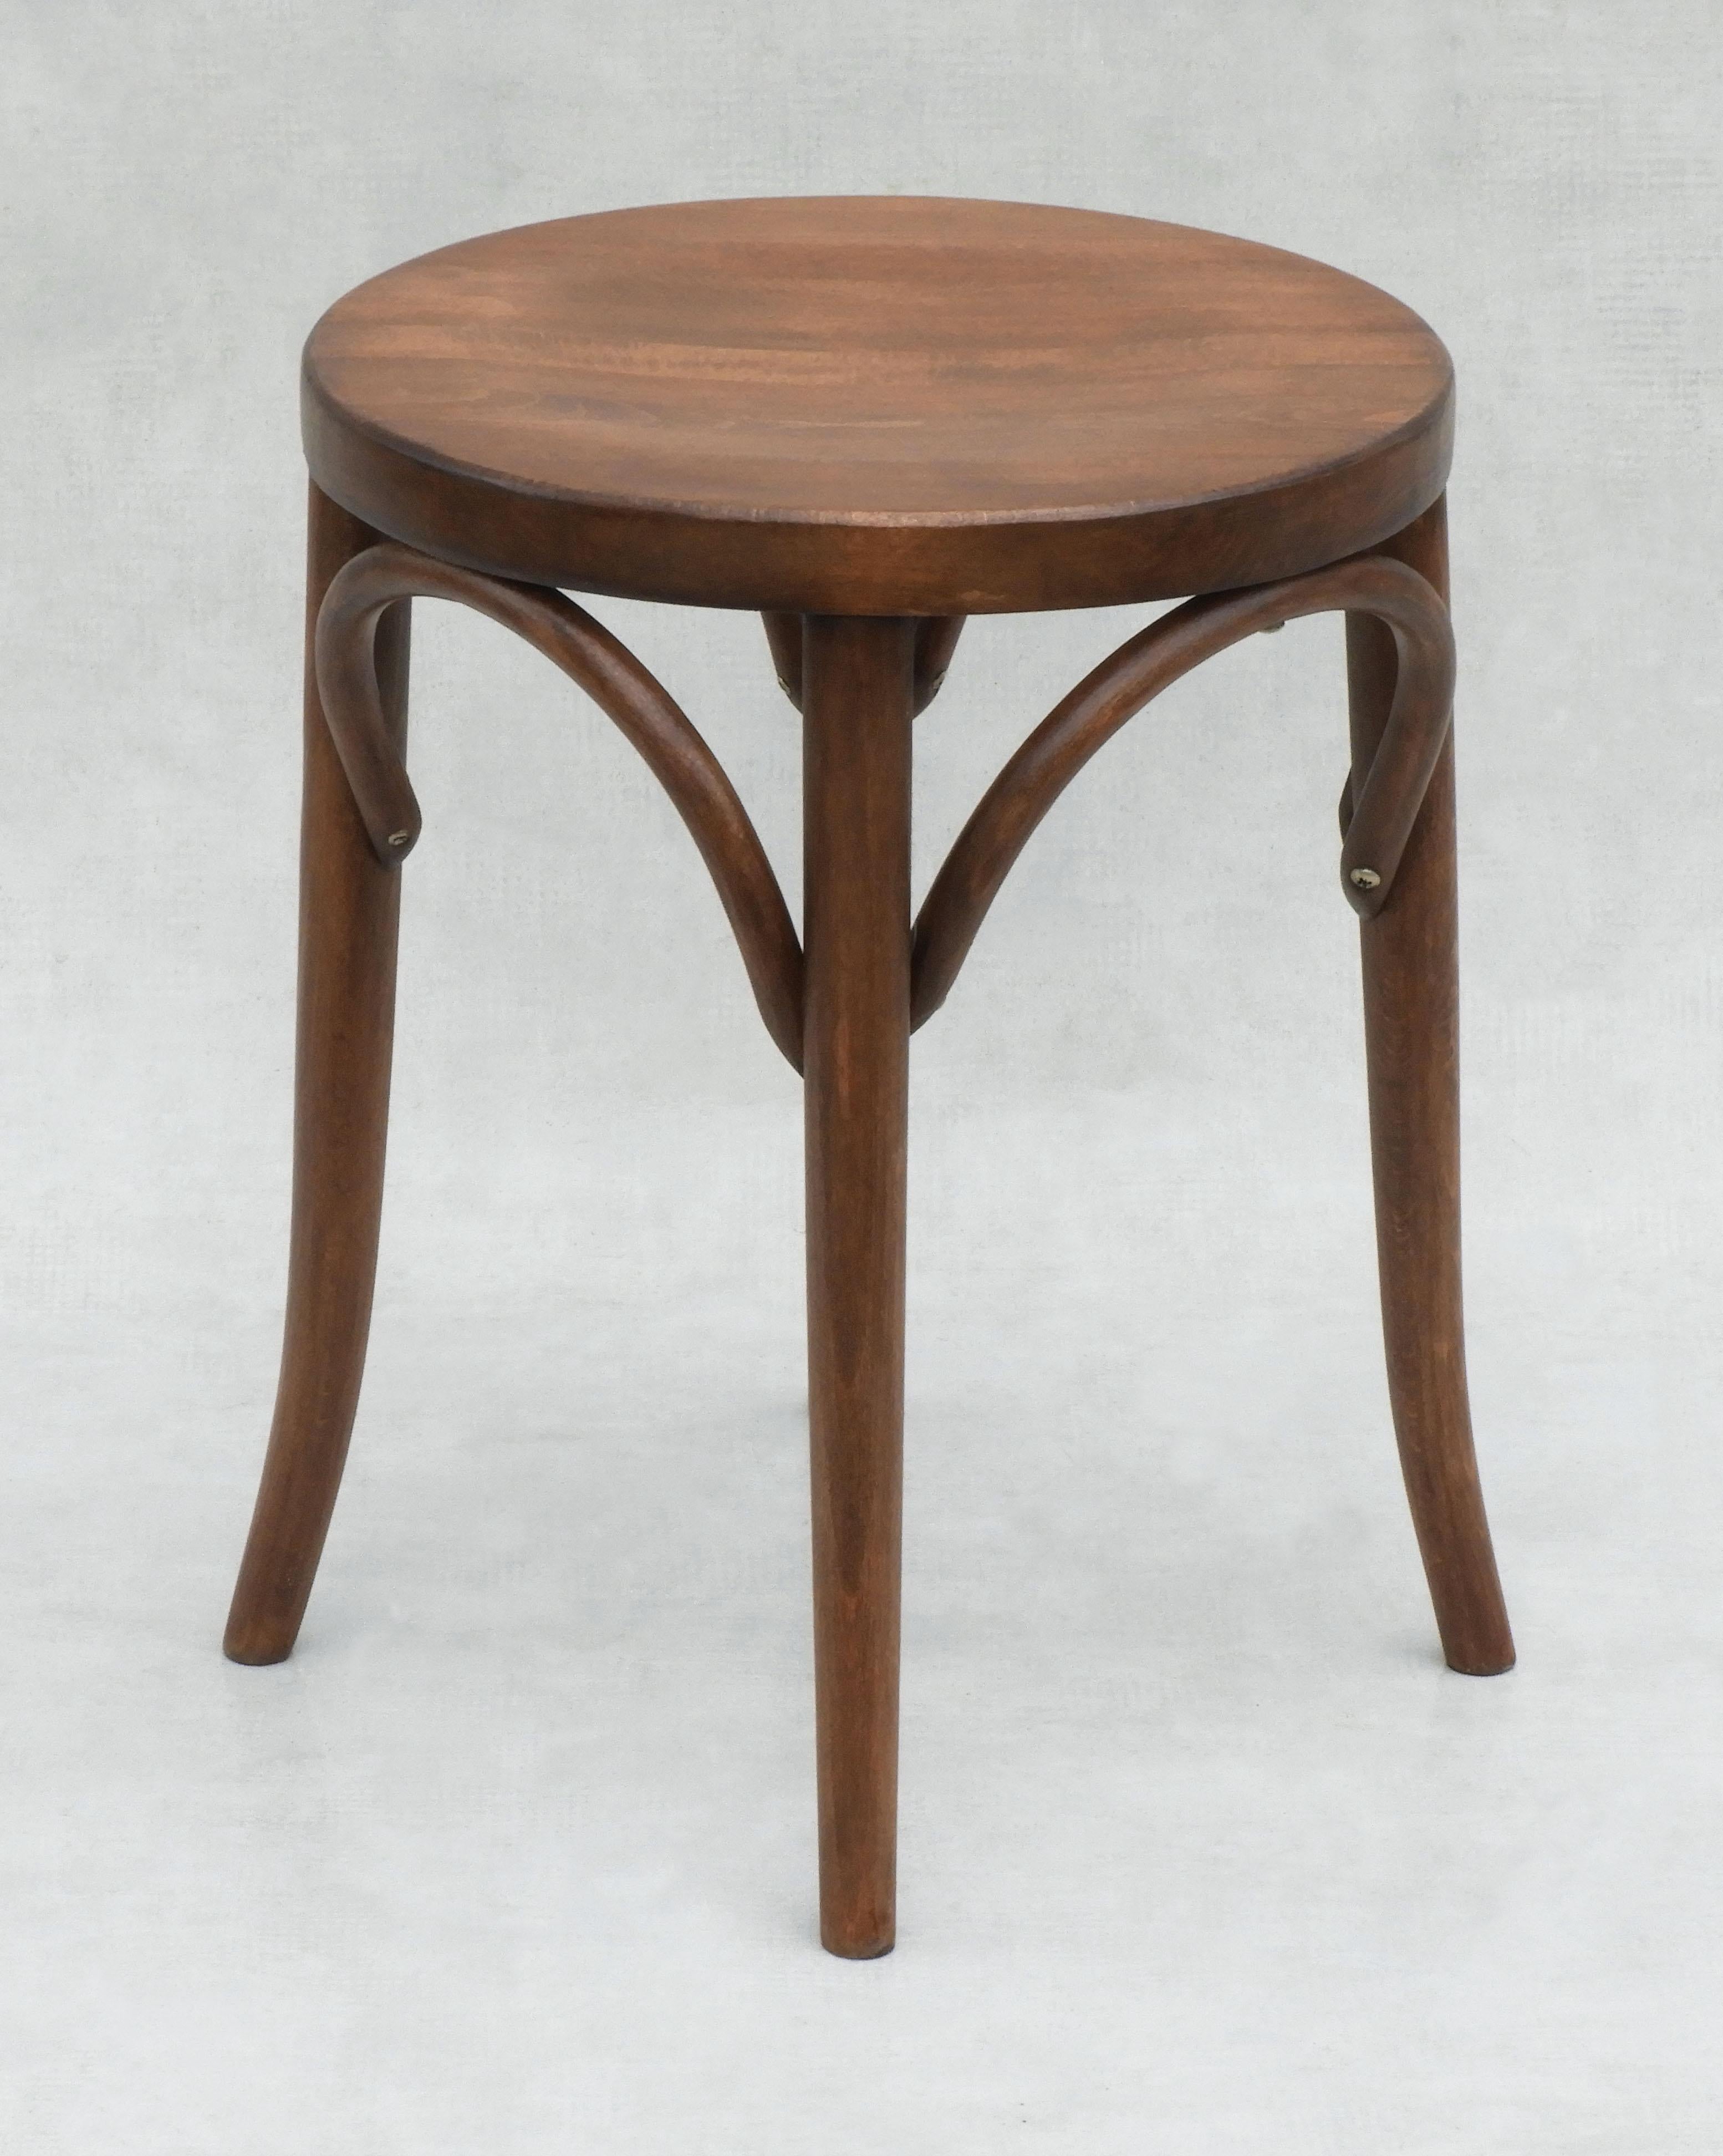 French Mid Century Bentwood Stool with Solid Wood Seat C1950s France